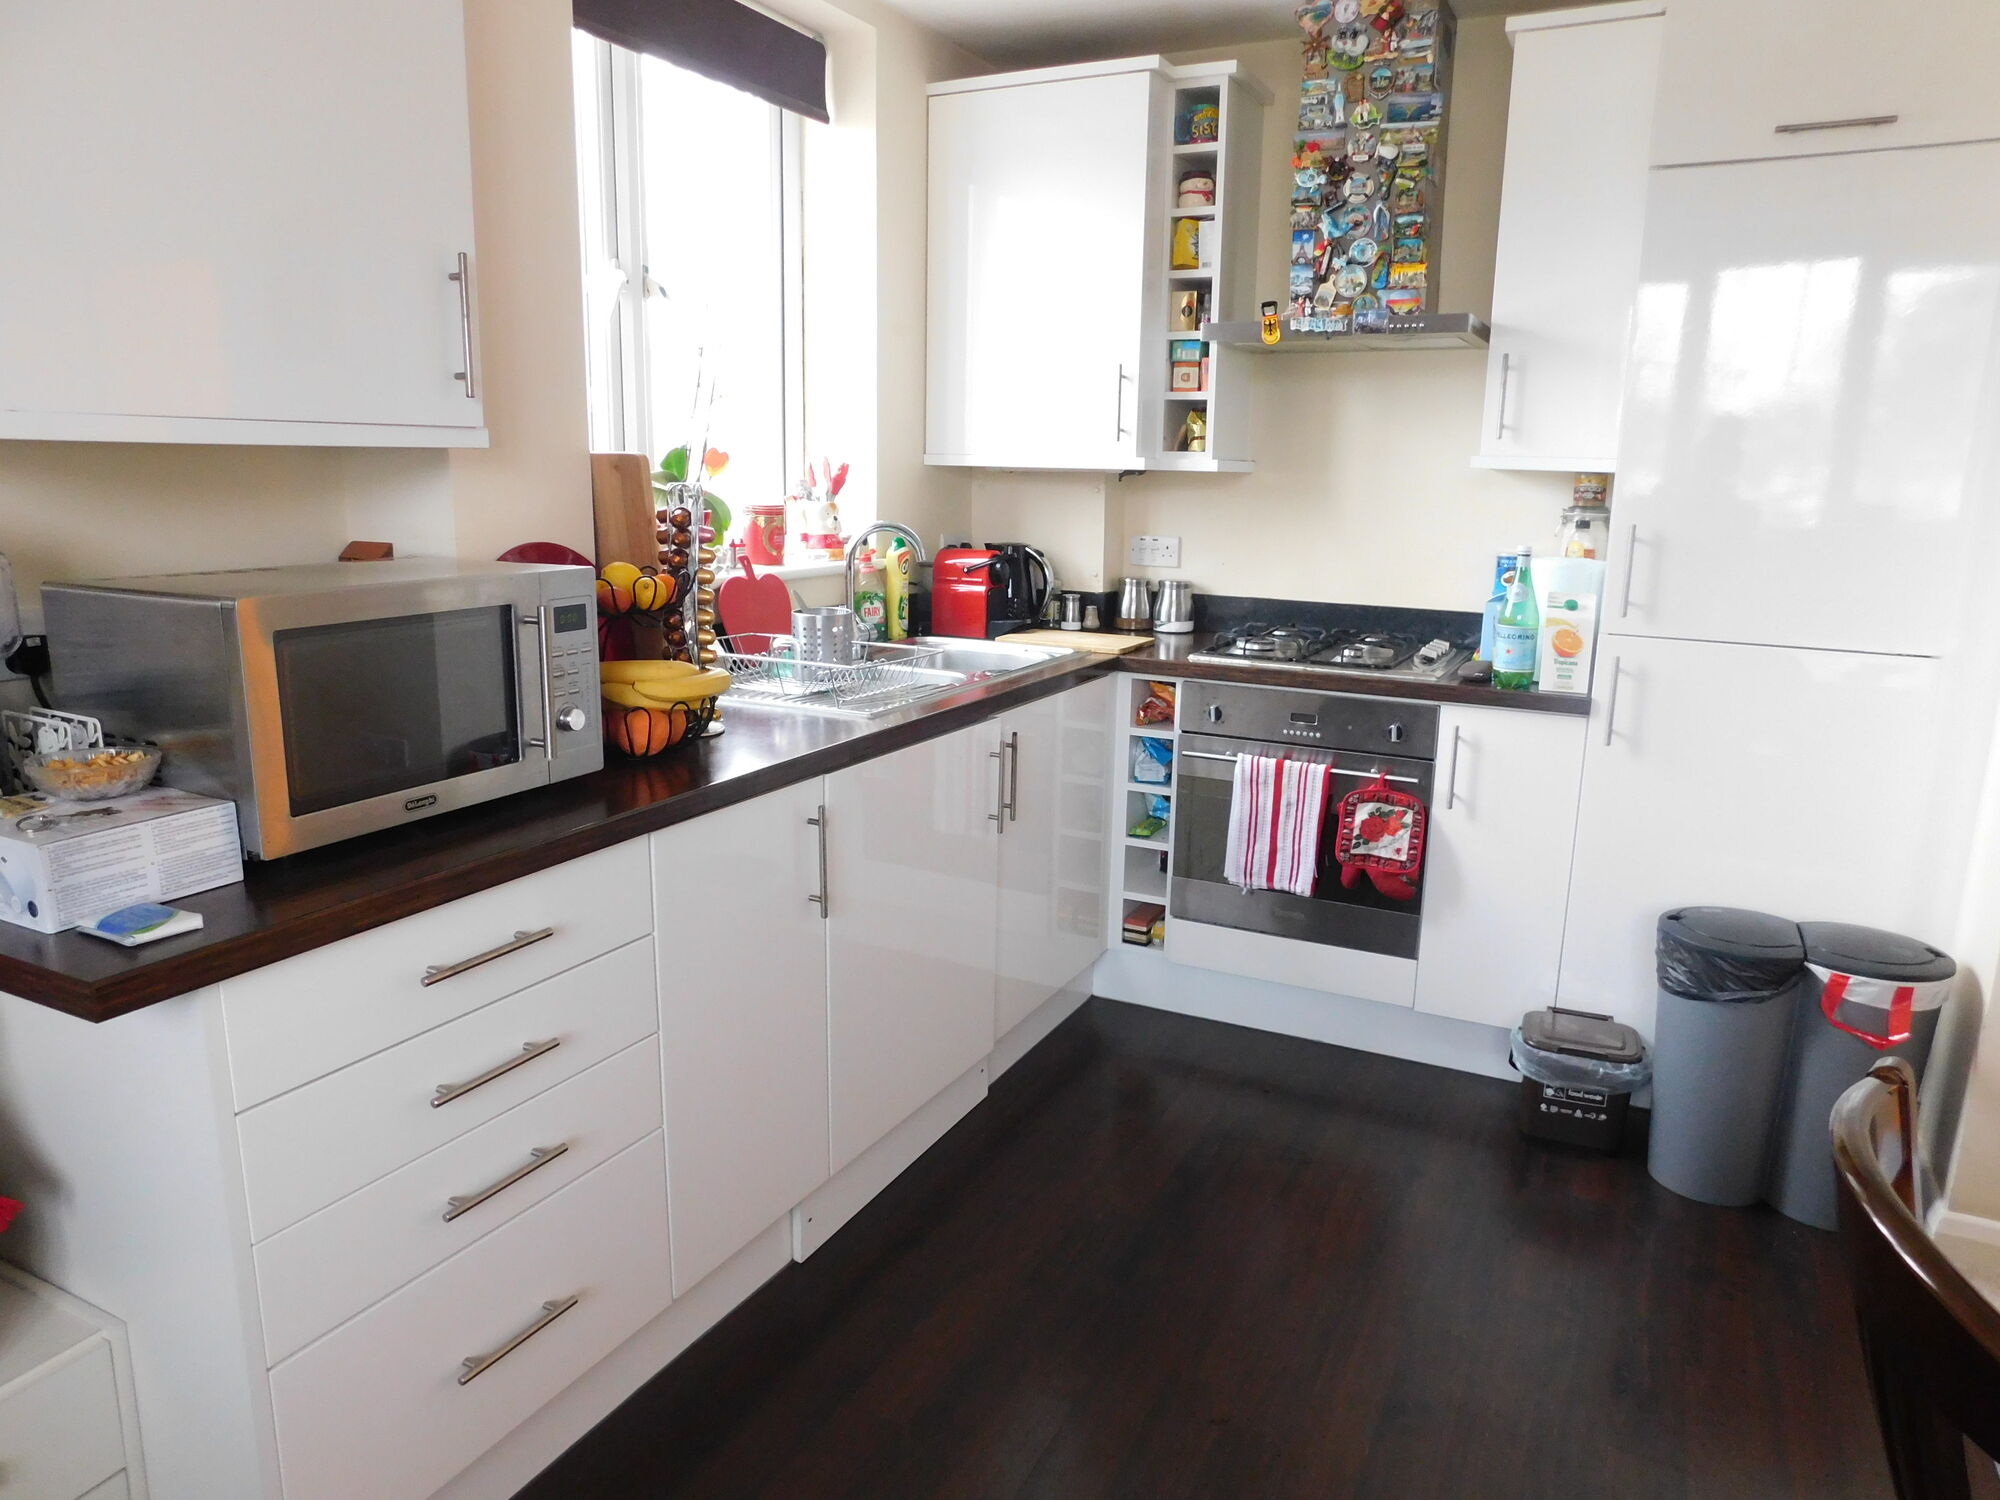 2 bedroom  flat to rent, Available now 322 Sutton Common Road, Sutton, SM3, main image